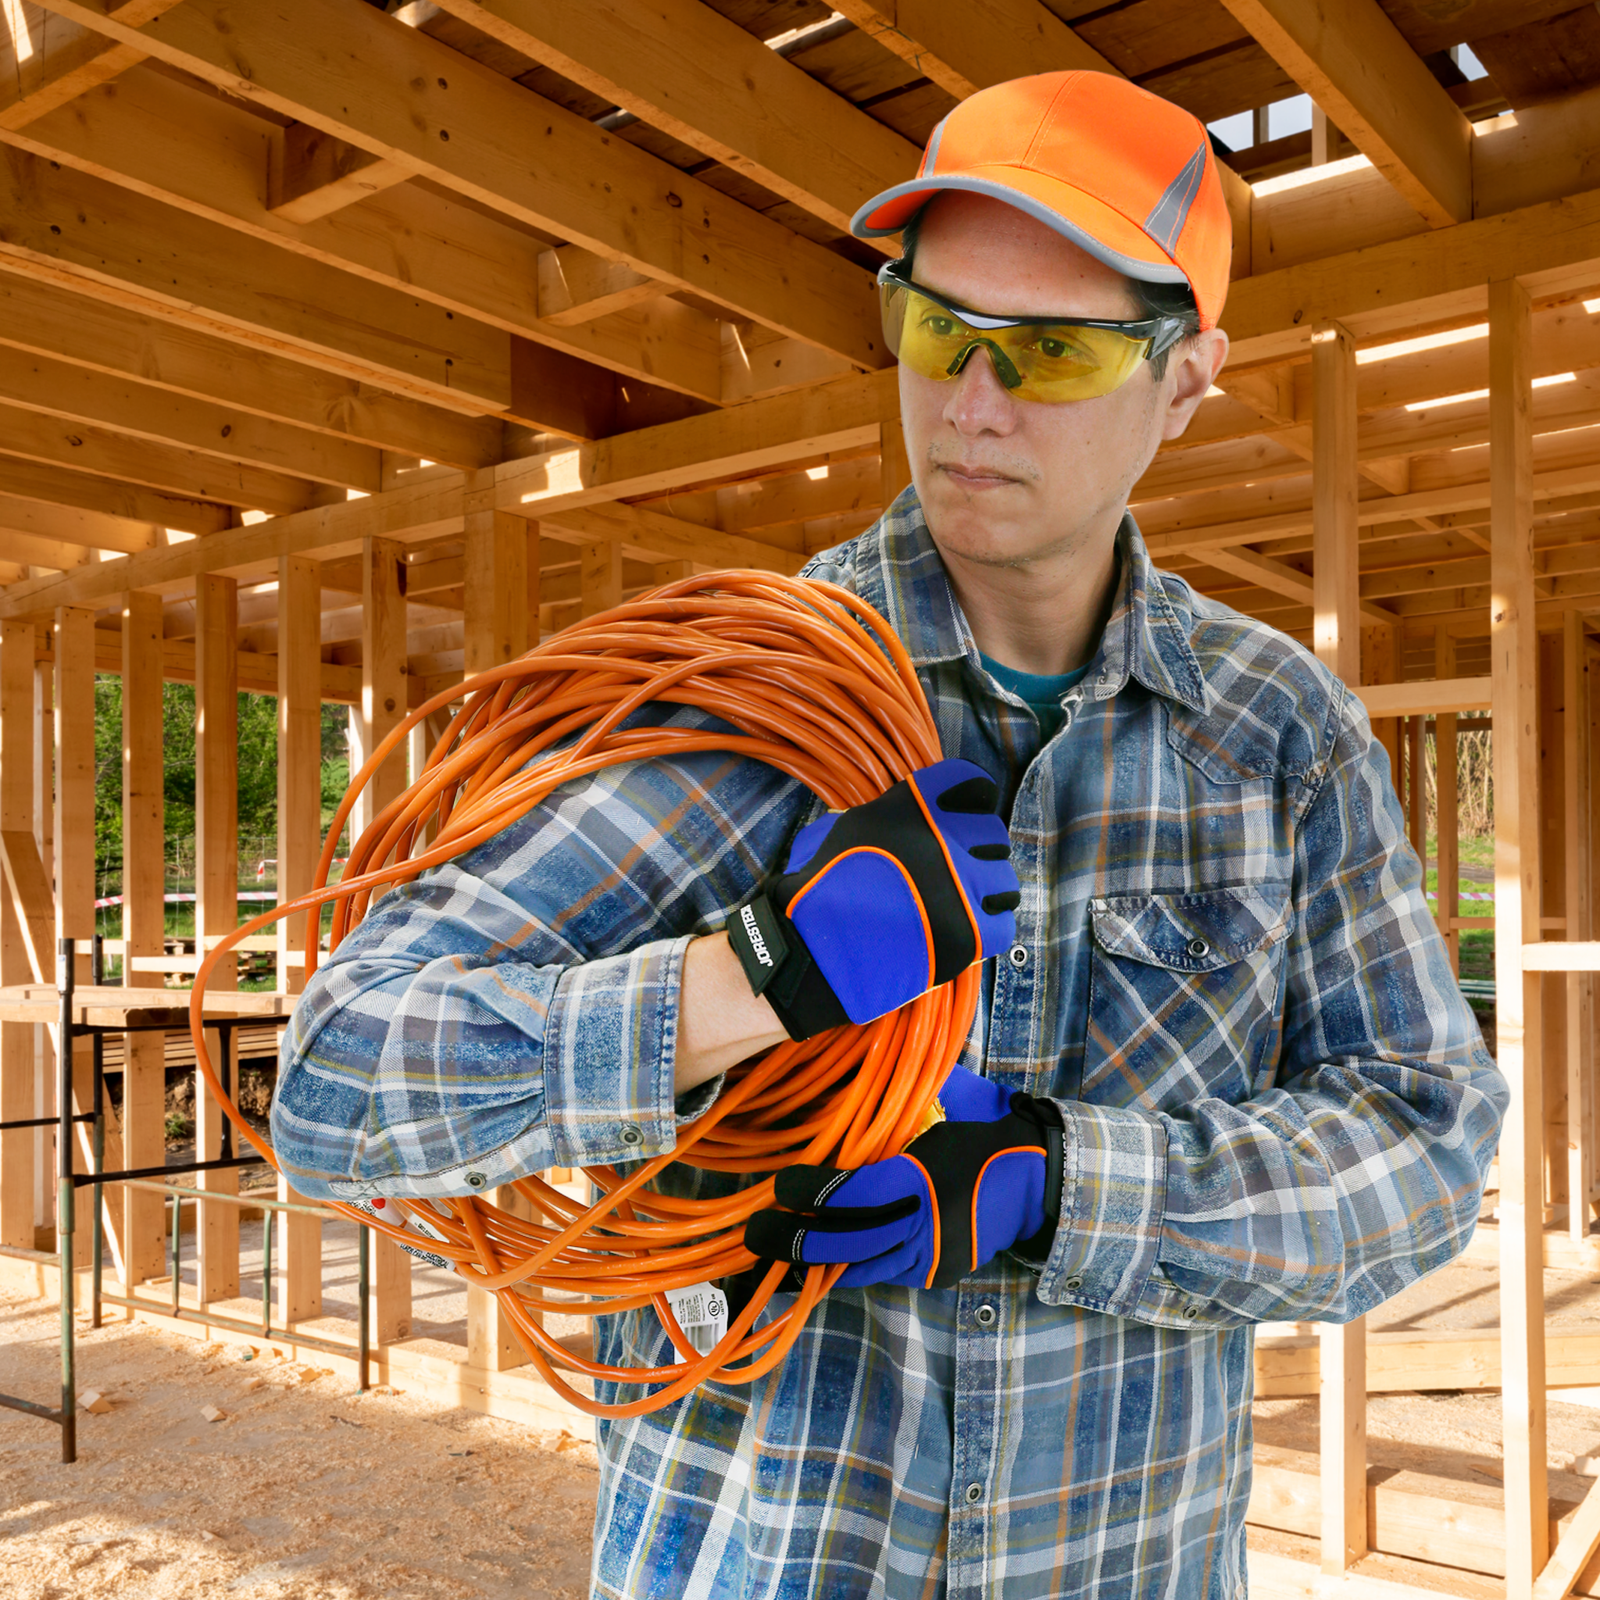 A man wearing the Framed JORESTECH impact resistant yellow safety glasses with frame while carrying an extension cord  in a construction of a building. The background shows a partially built wooden structure 